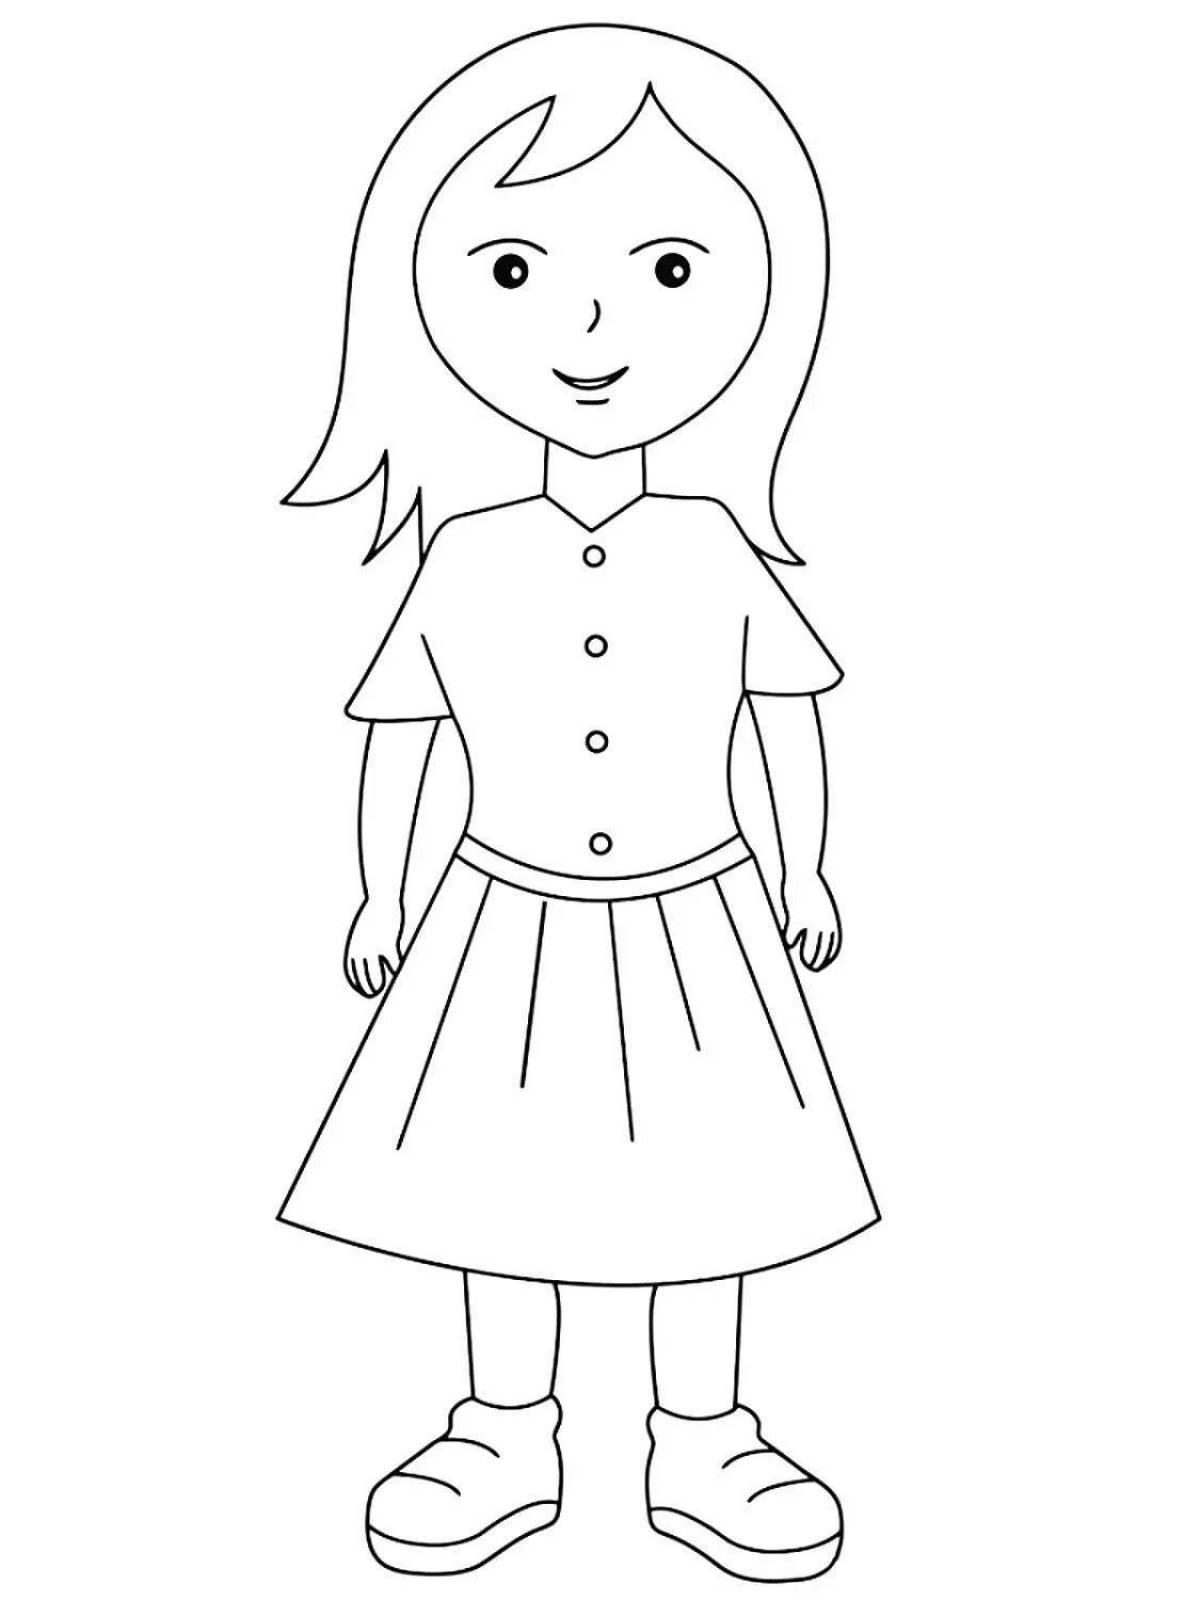 Color frenzy kuyrshak coloring page